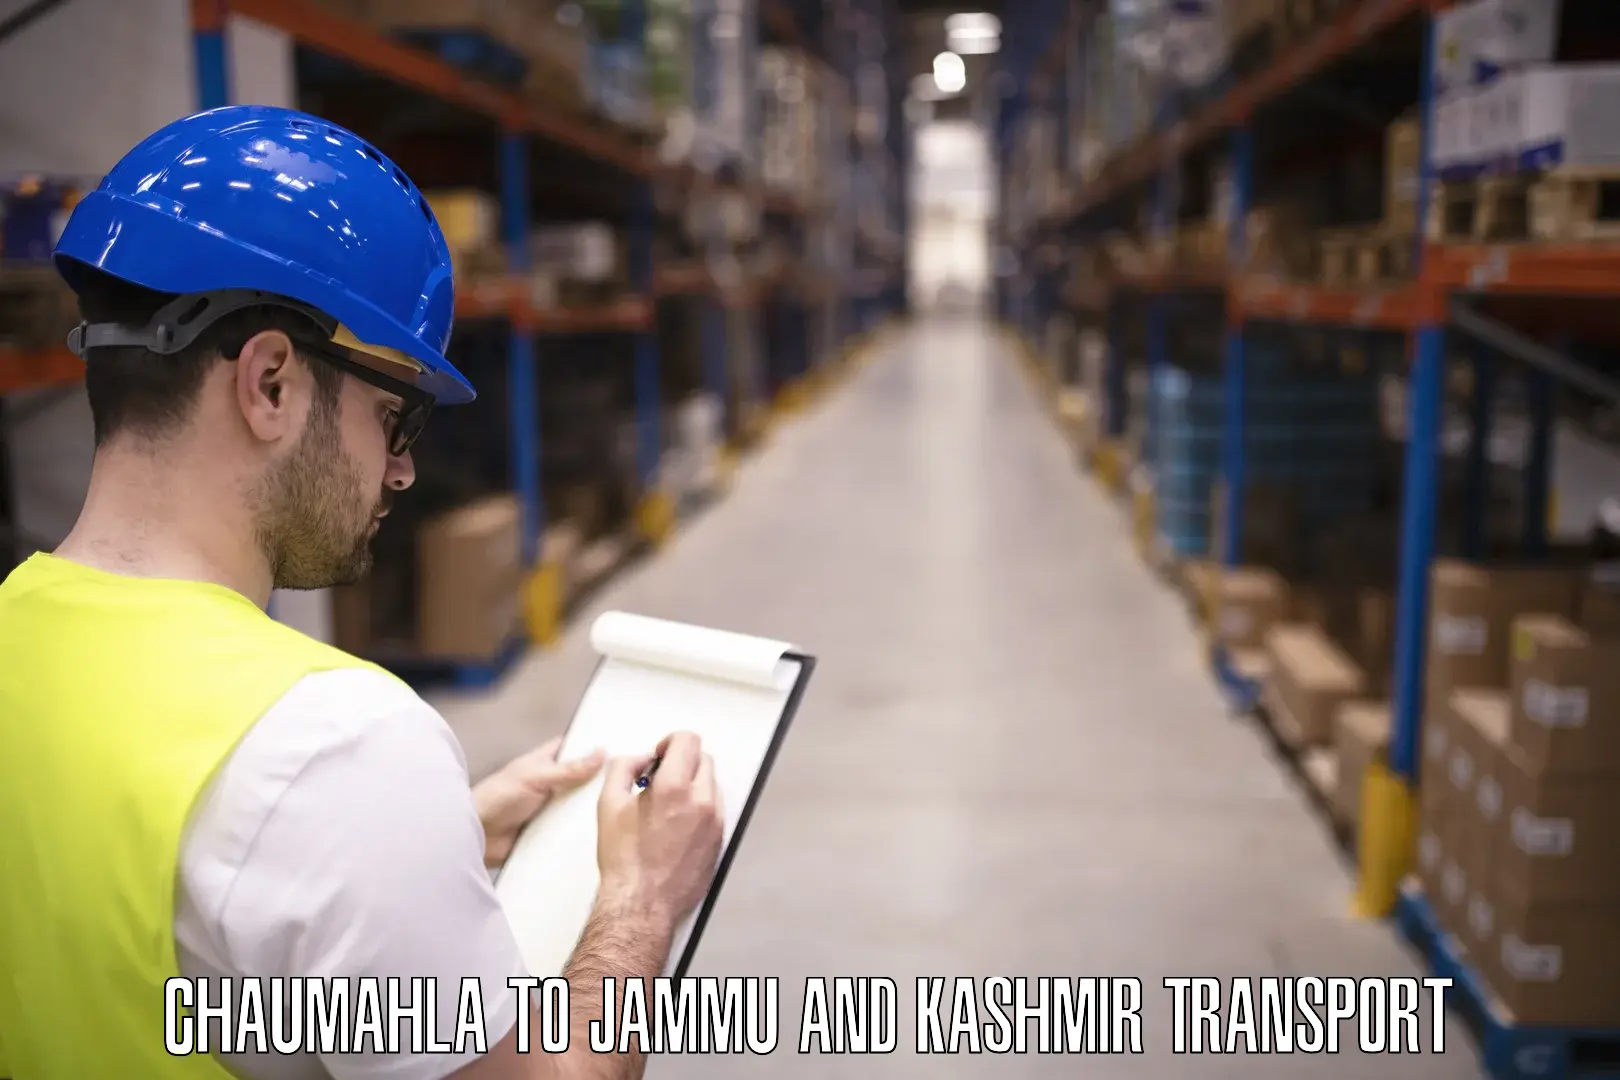 Commercial transport service Chaumahla to Jammu and Kashmir